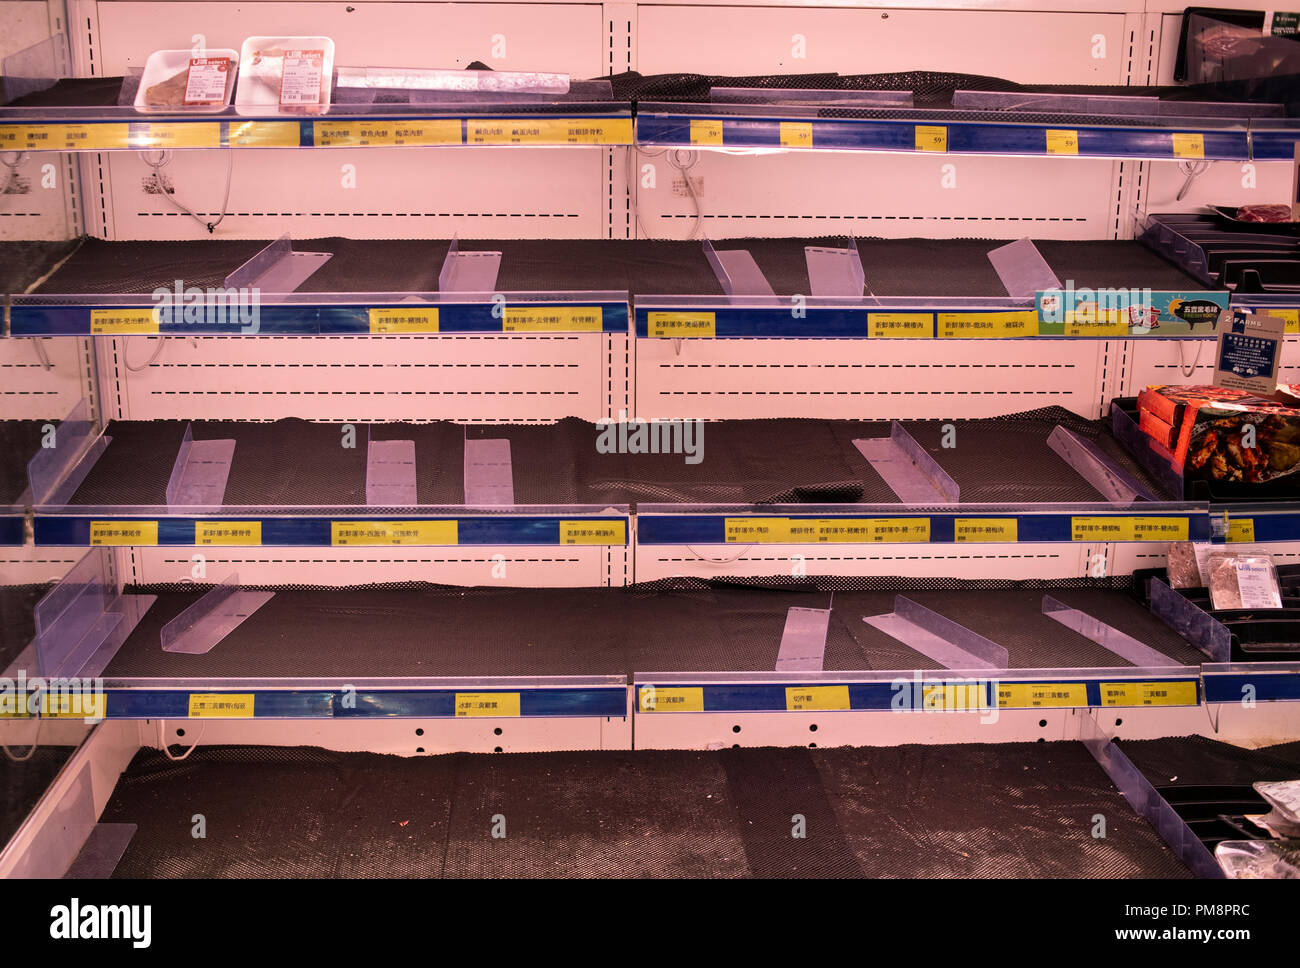 Empty Supermarket meat shelves as residents stock up ahead of Super Typhoon Mangkhut arrival in Hong Kong, China. It is expected to land with a typhoon signal No. 8. Stock Photo